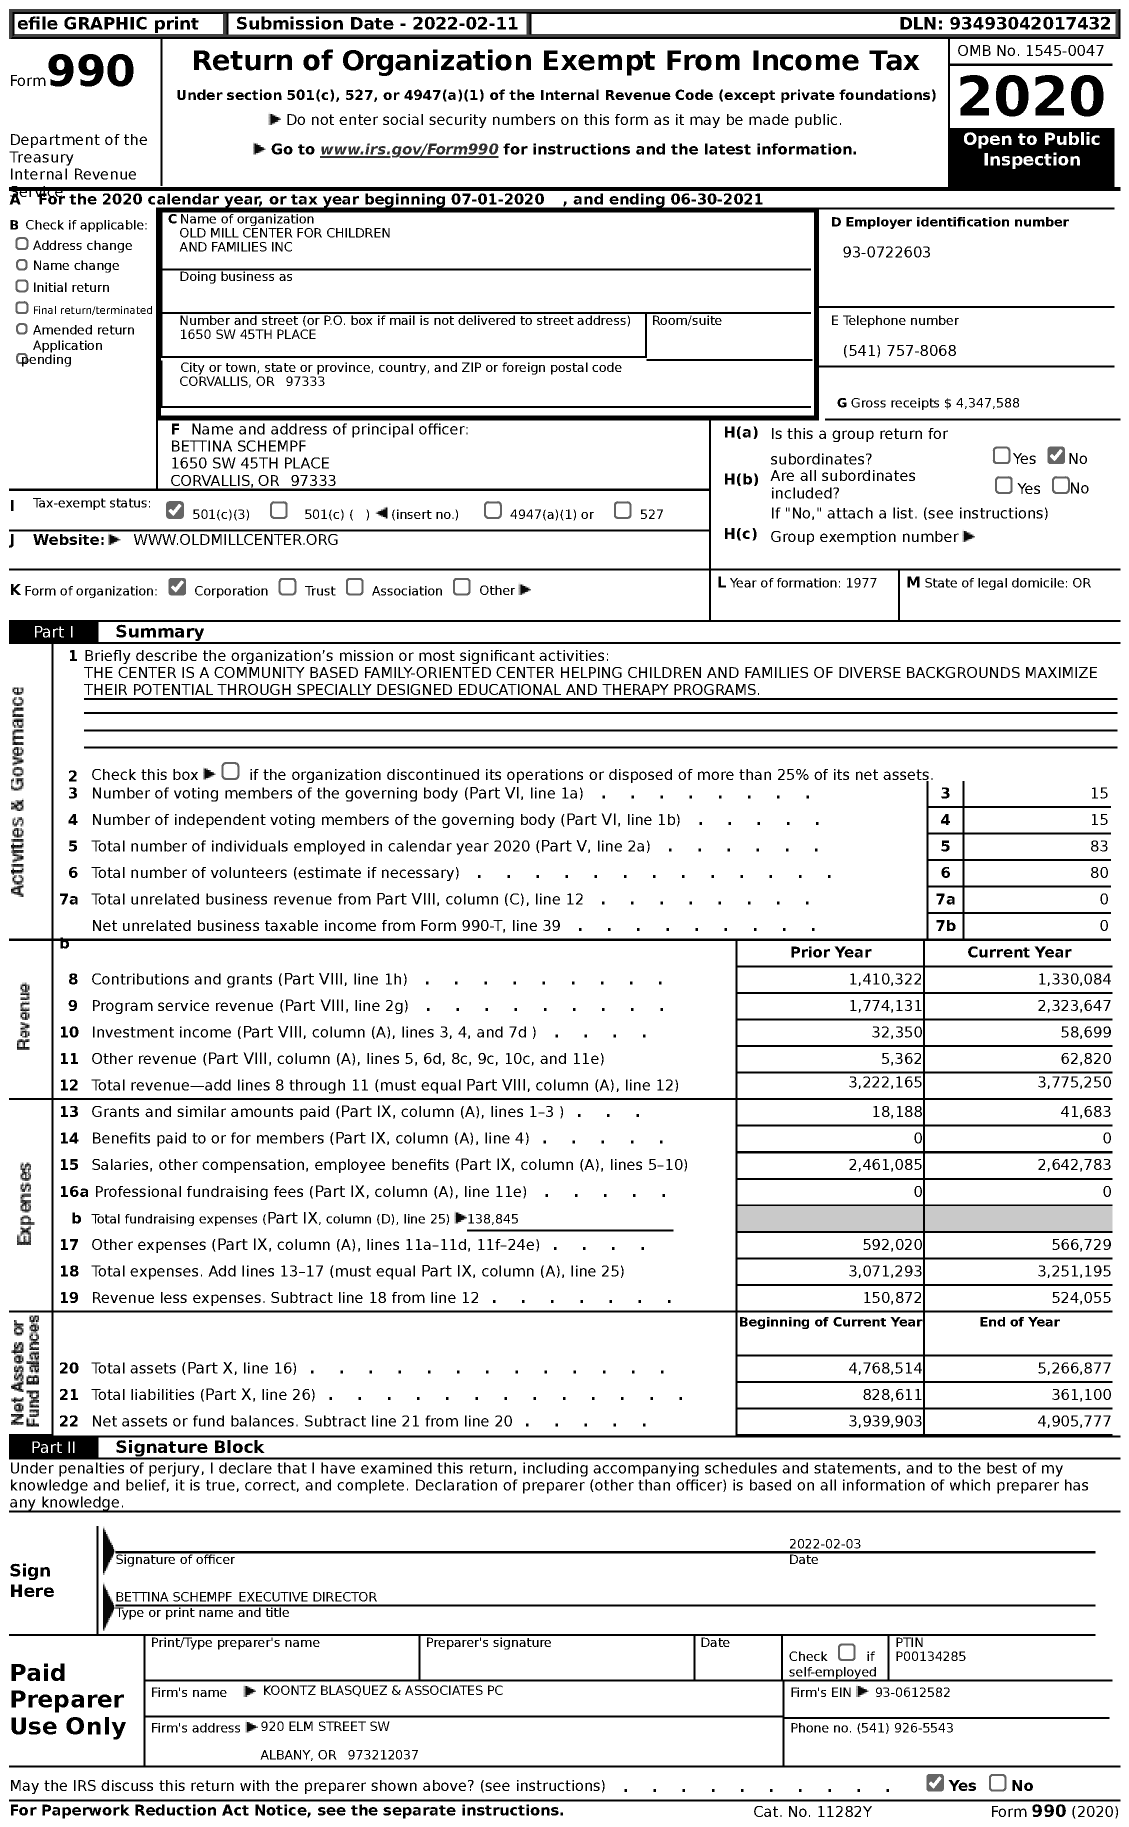 Image of first page of 2020 Form 990 for Old Mill Center for Children and Families